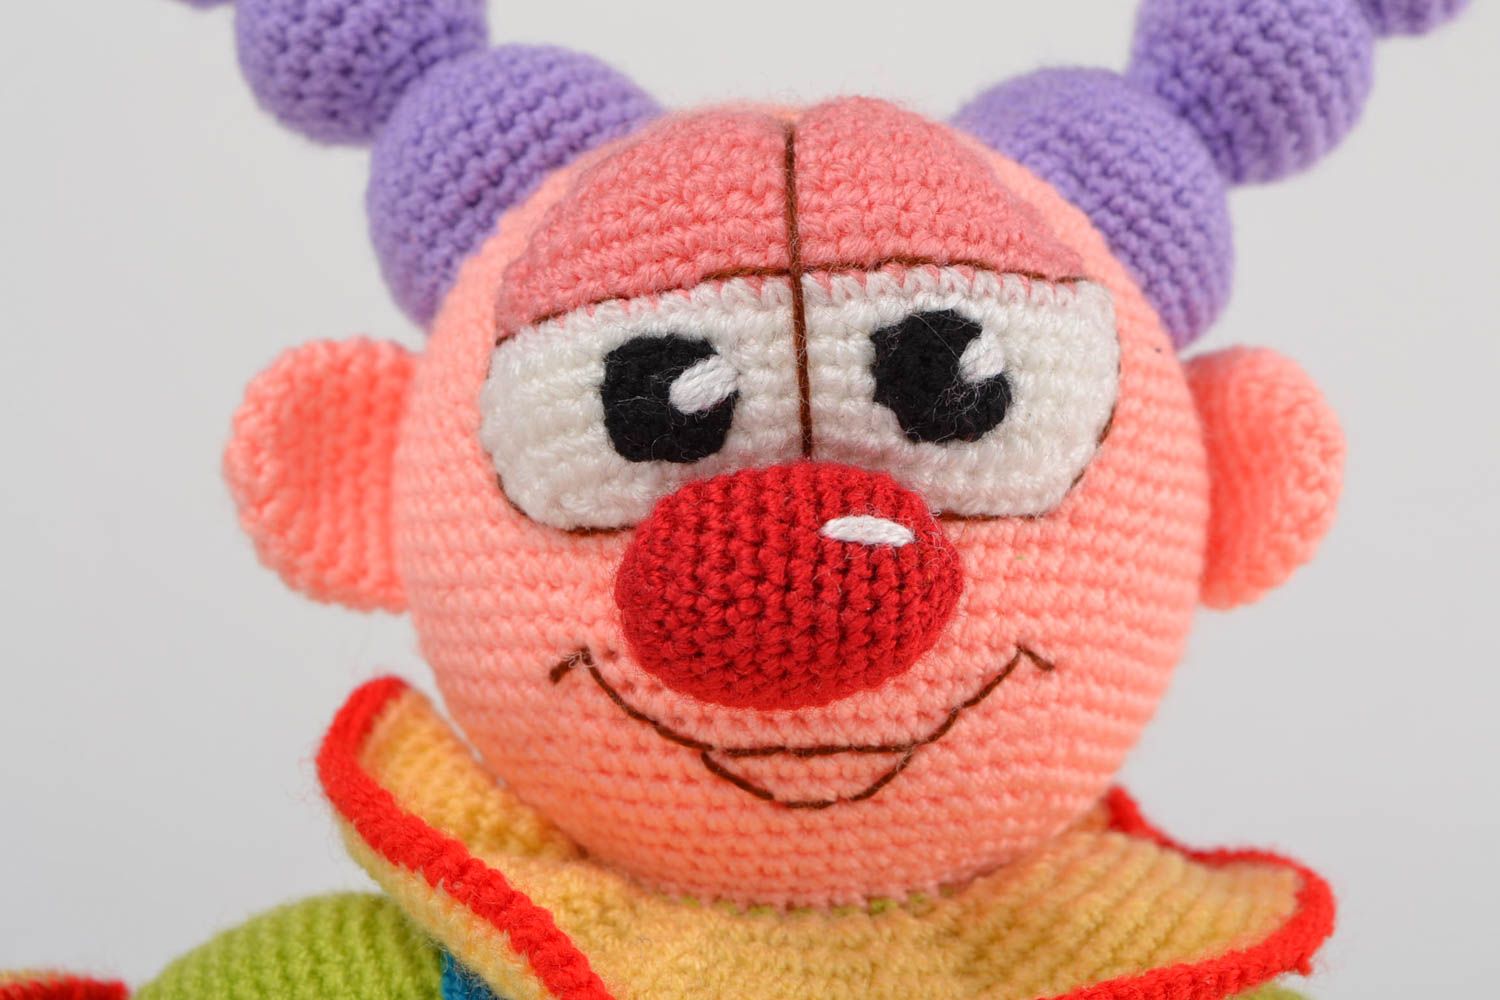 Handmade designer soft toy crocheted of acrylic threads colorful bright clown photo 3